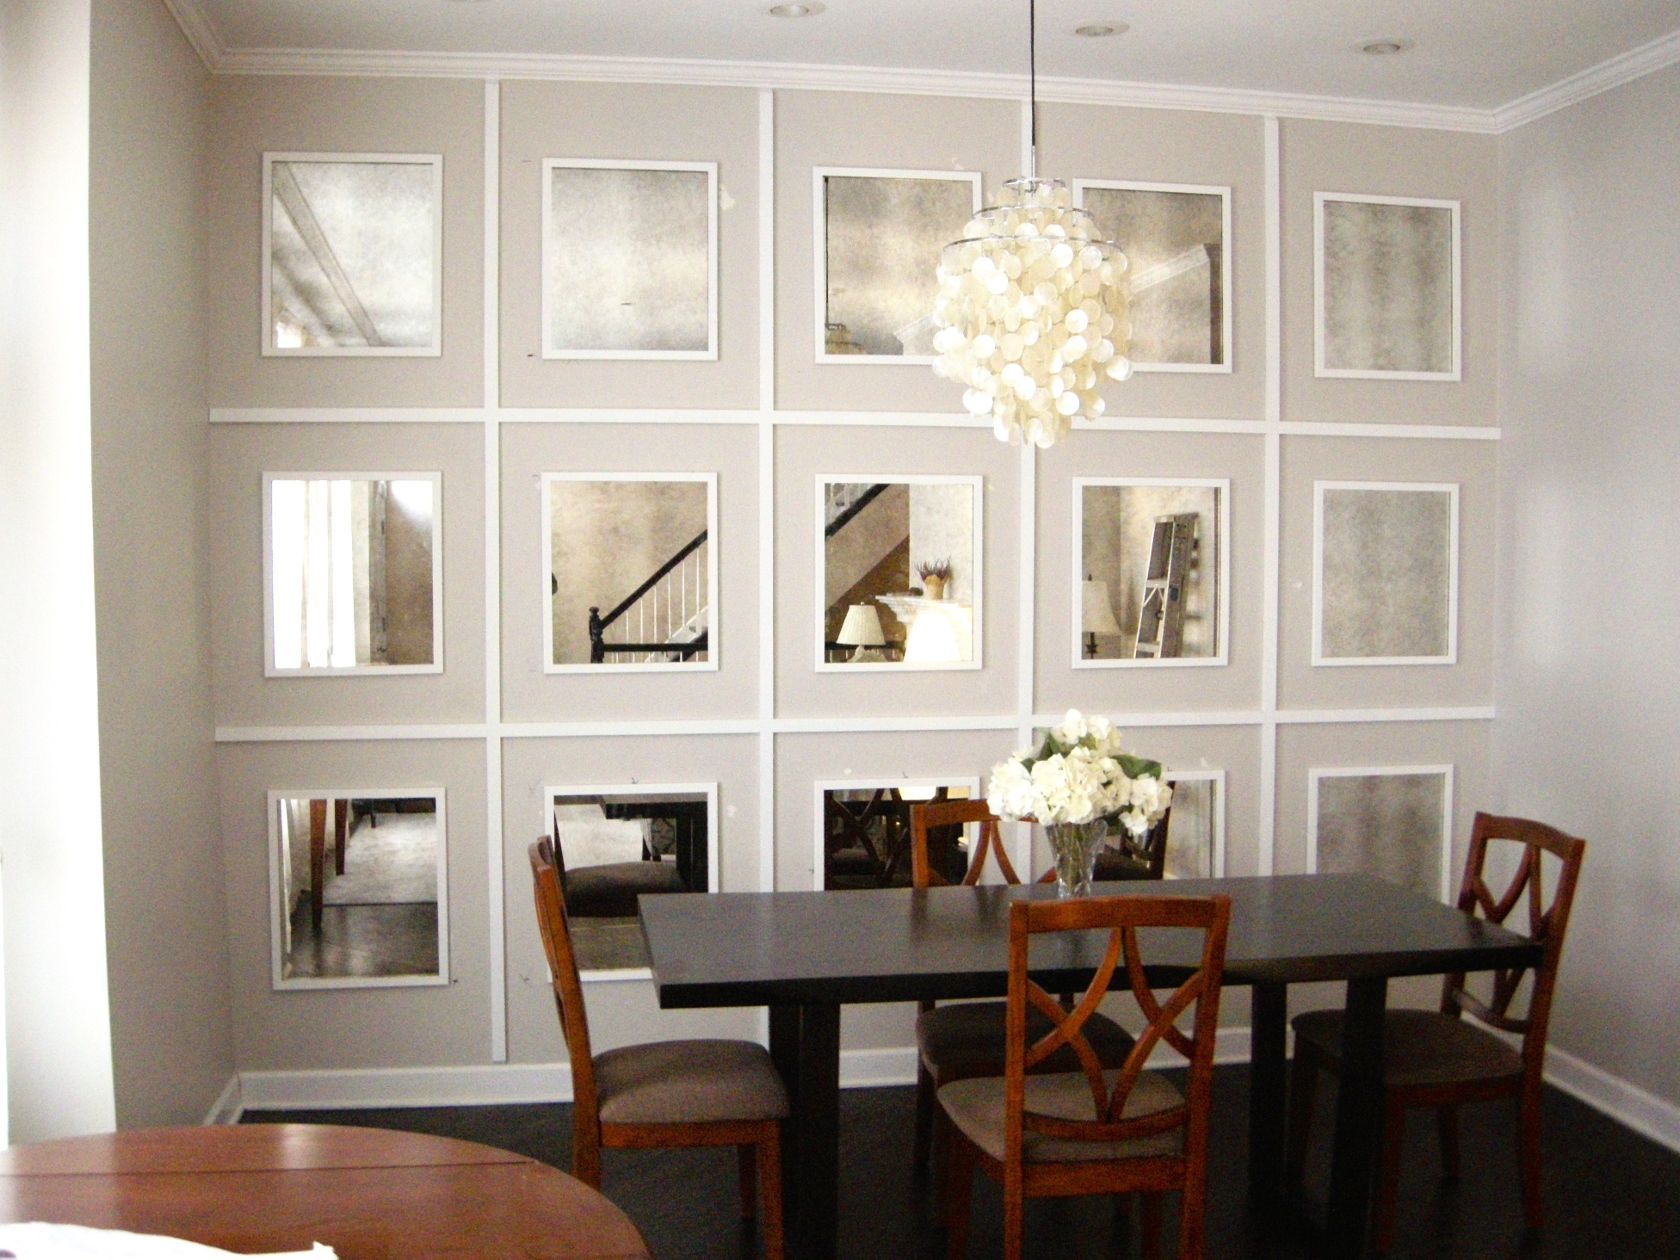 Line the Entire Wall with Panel Mirrors